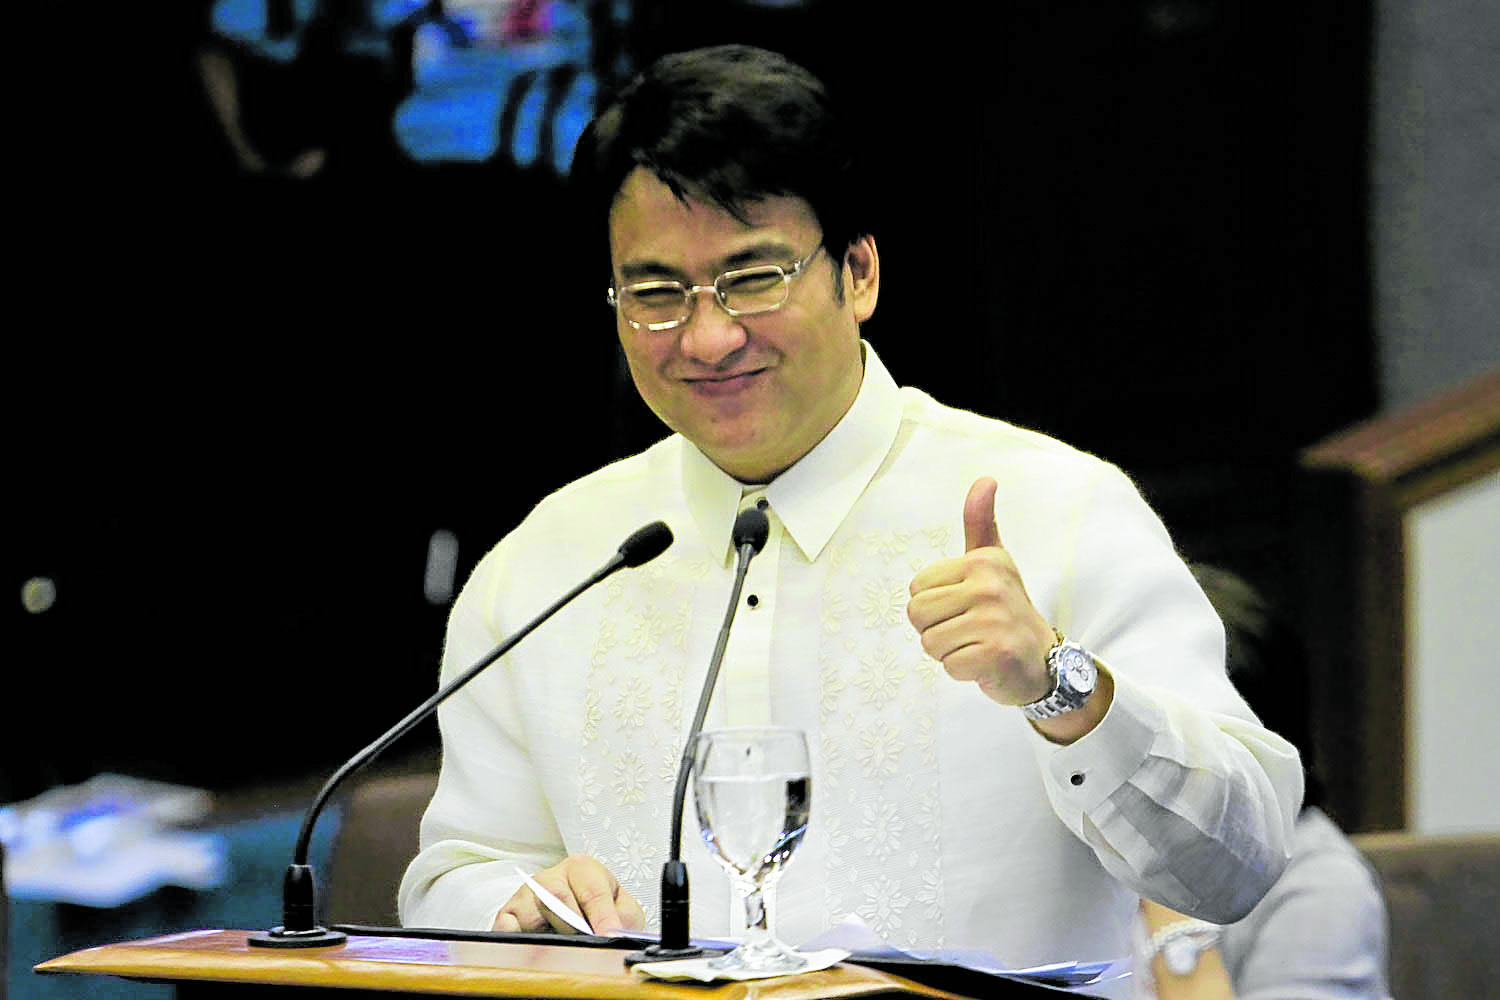 “The truth prevailed,” the Lakas-CMD had this to say after the Sandiganbayan junked all pork-barrel cases against Sen. Bong Revilla.